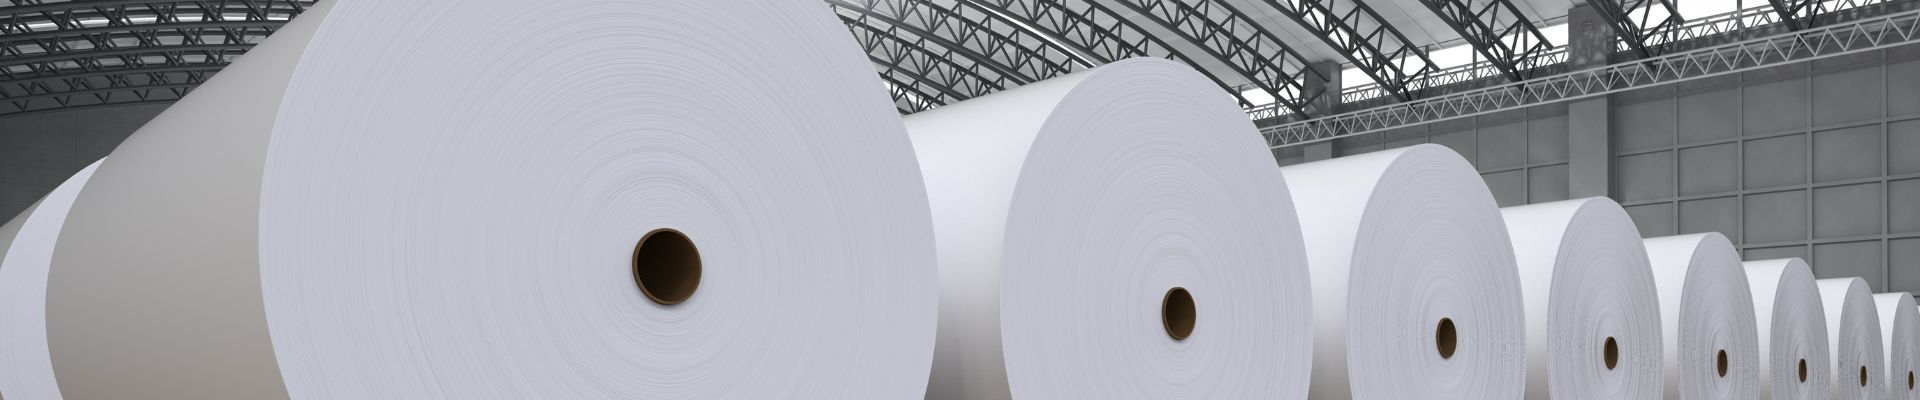 China Sublimation Sticker Paper Manufacturers Suppliers Factory